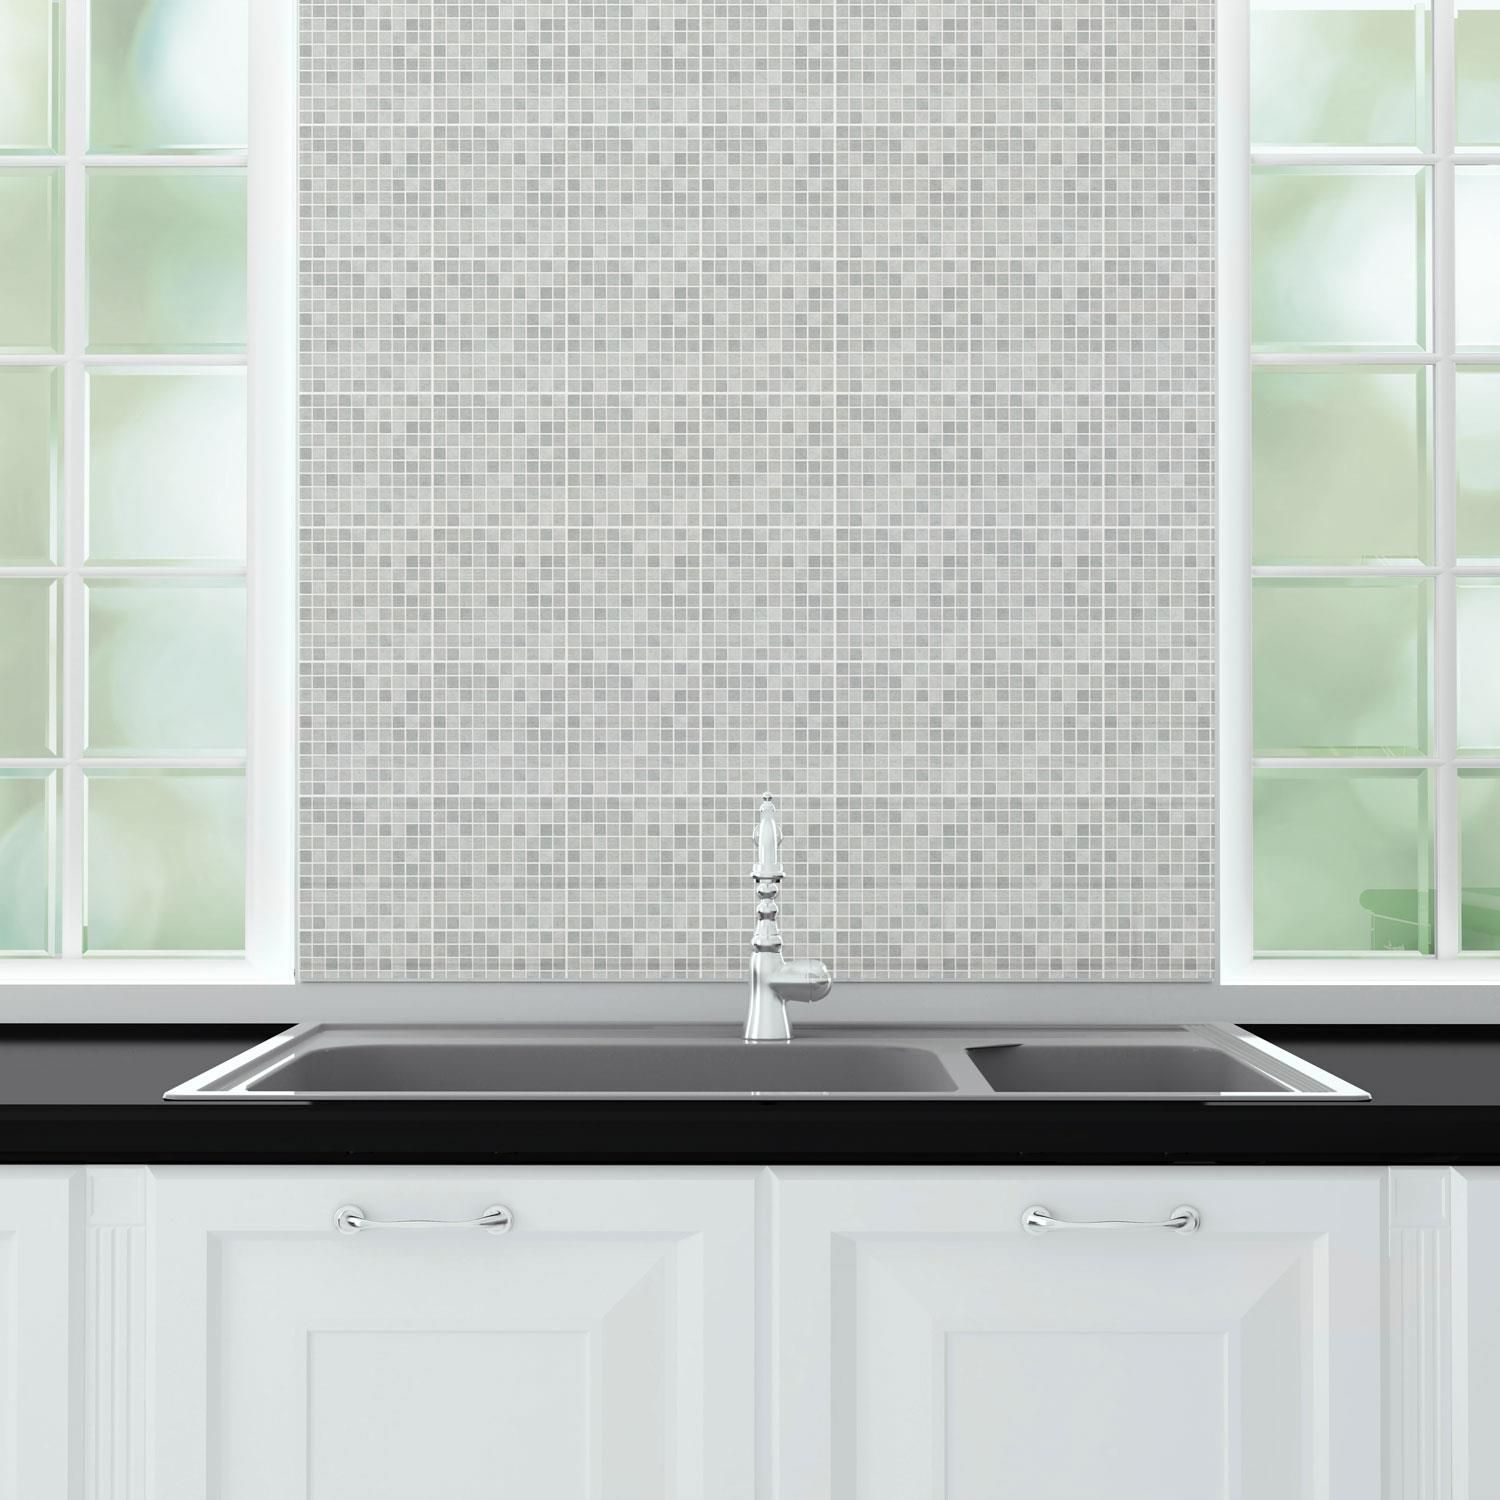 -Our new Natural Grey Limestone Mosaic Wall Tile Sticker Set gives any space a stunning aesthetic! 
-To apply, just peel and stick onto any clean, flat surfaces like wall, furniture or as window screen, and you are good to go! 
- Please note that due to different devices and screen settings, the colour of the webpage picture you see may have a certain colour difference from the actual product.
- Package Contains  24 pieces of stickers 15 cm (6 in). Coverage area: 0.54 square meters